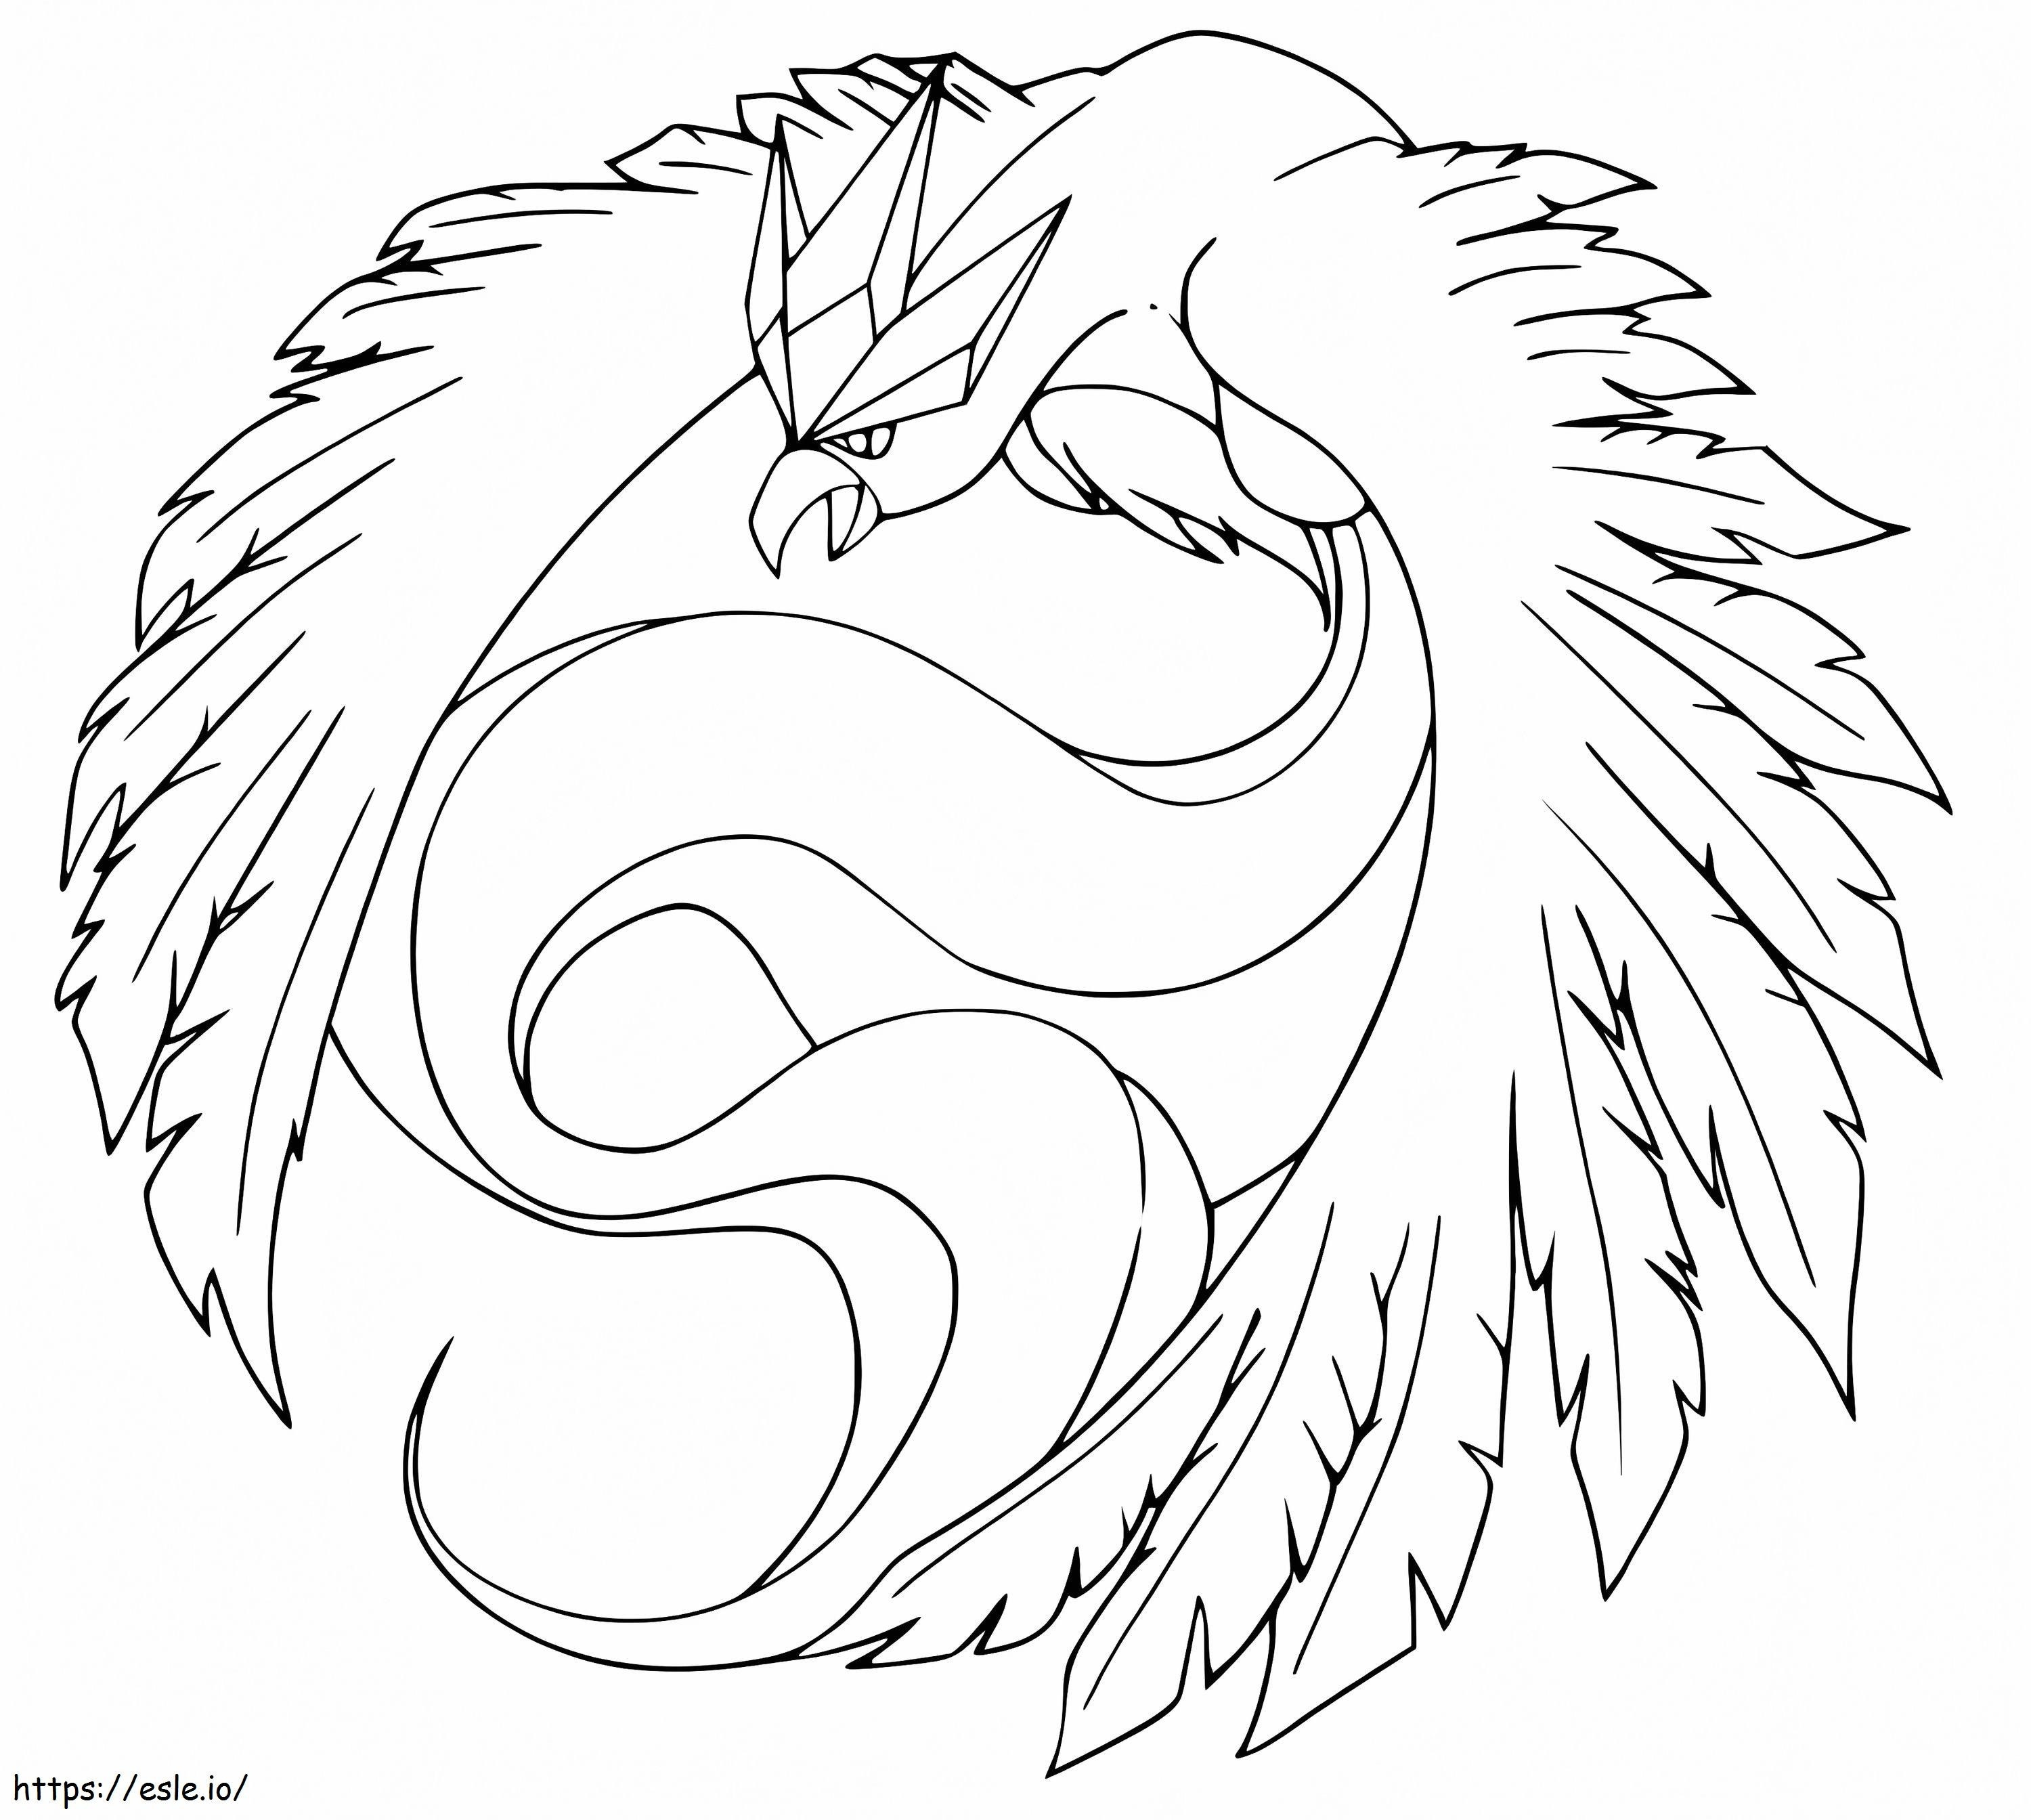 Awesome Articuno coloring page